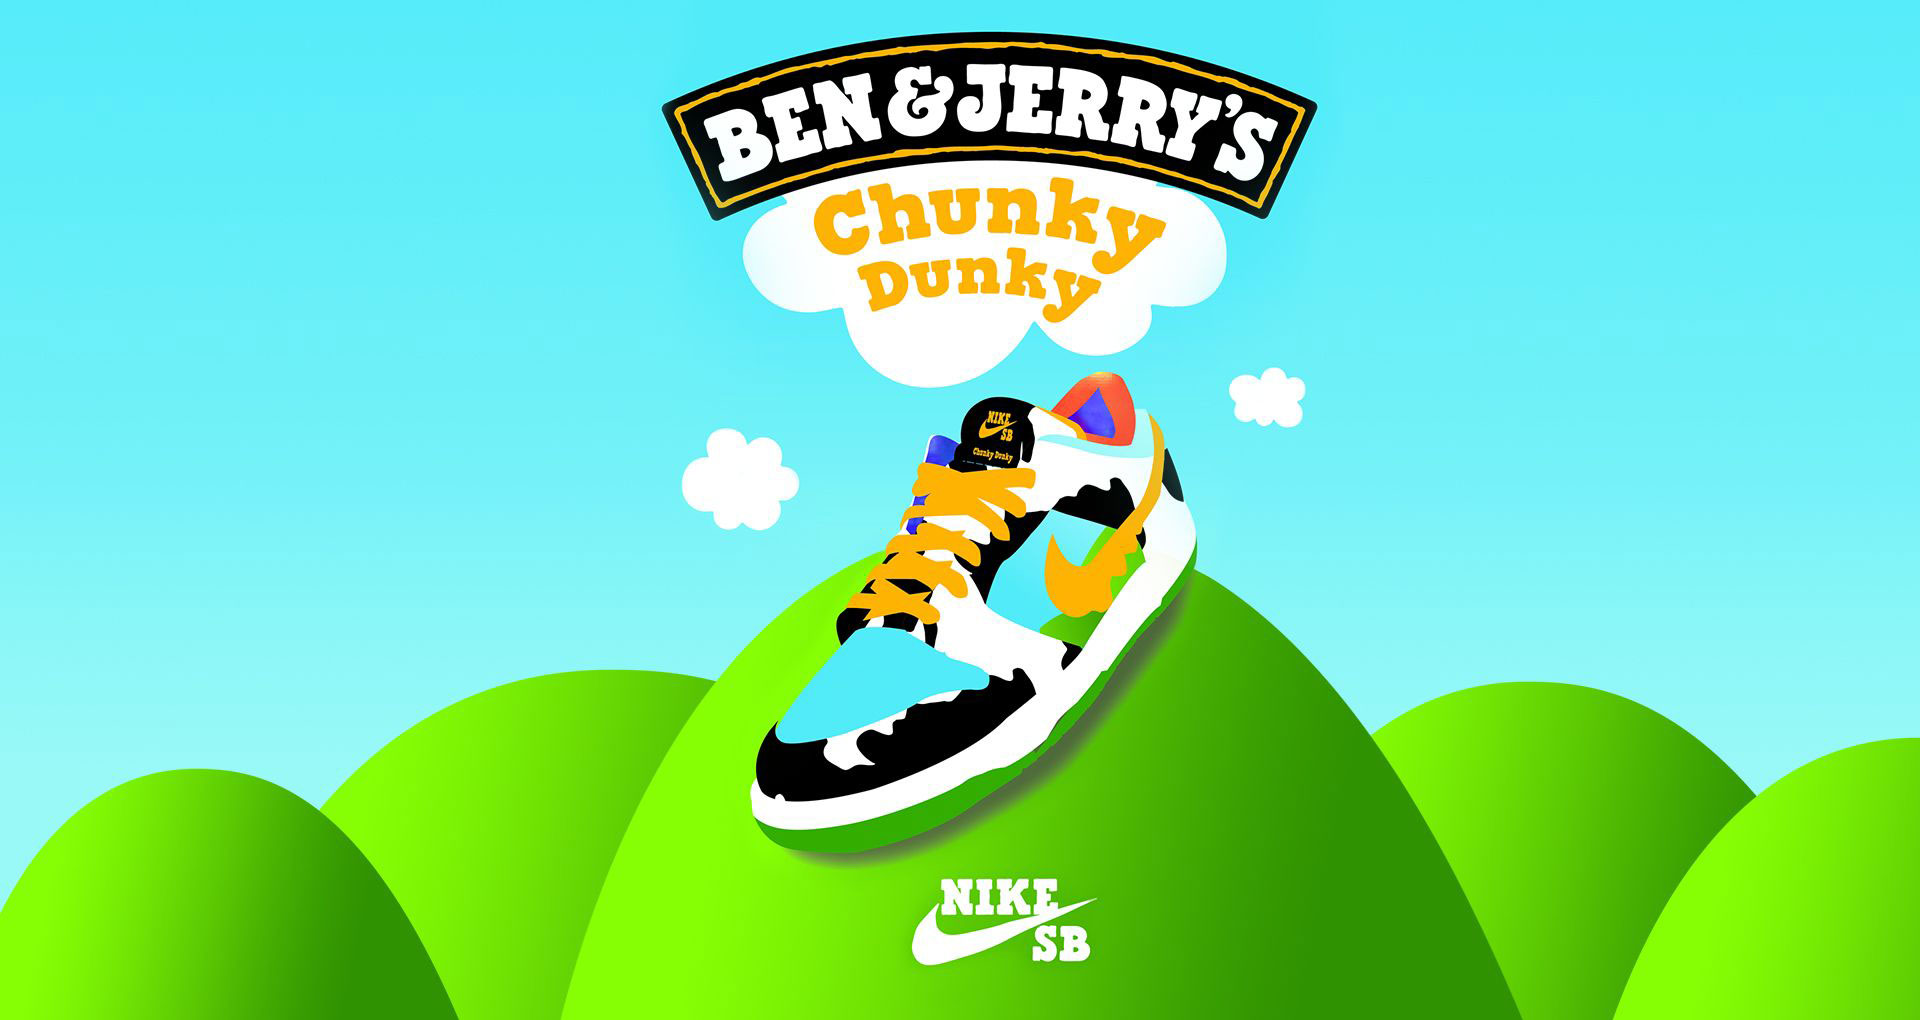 ben and jerry dunks store list